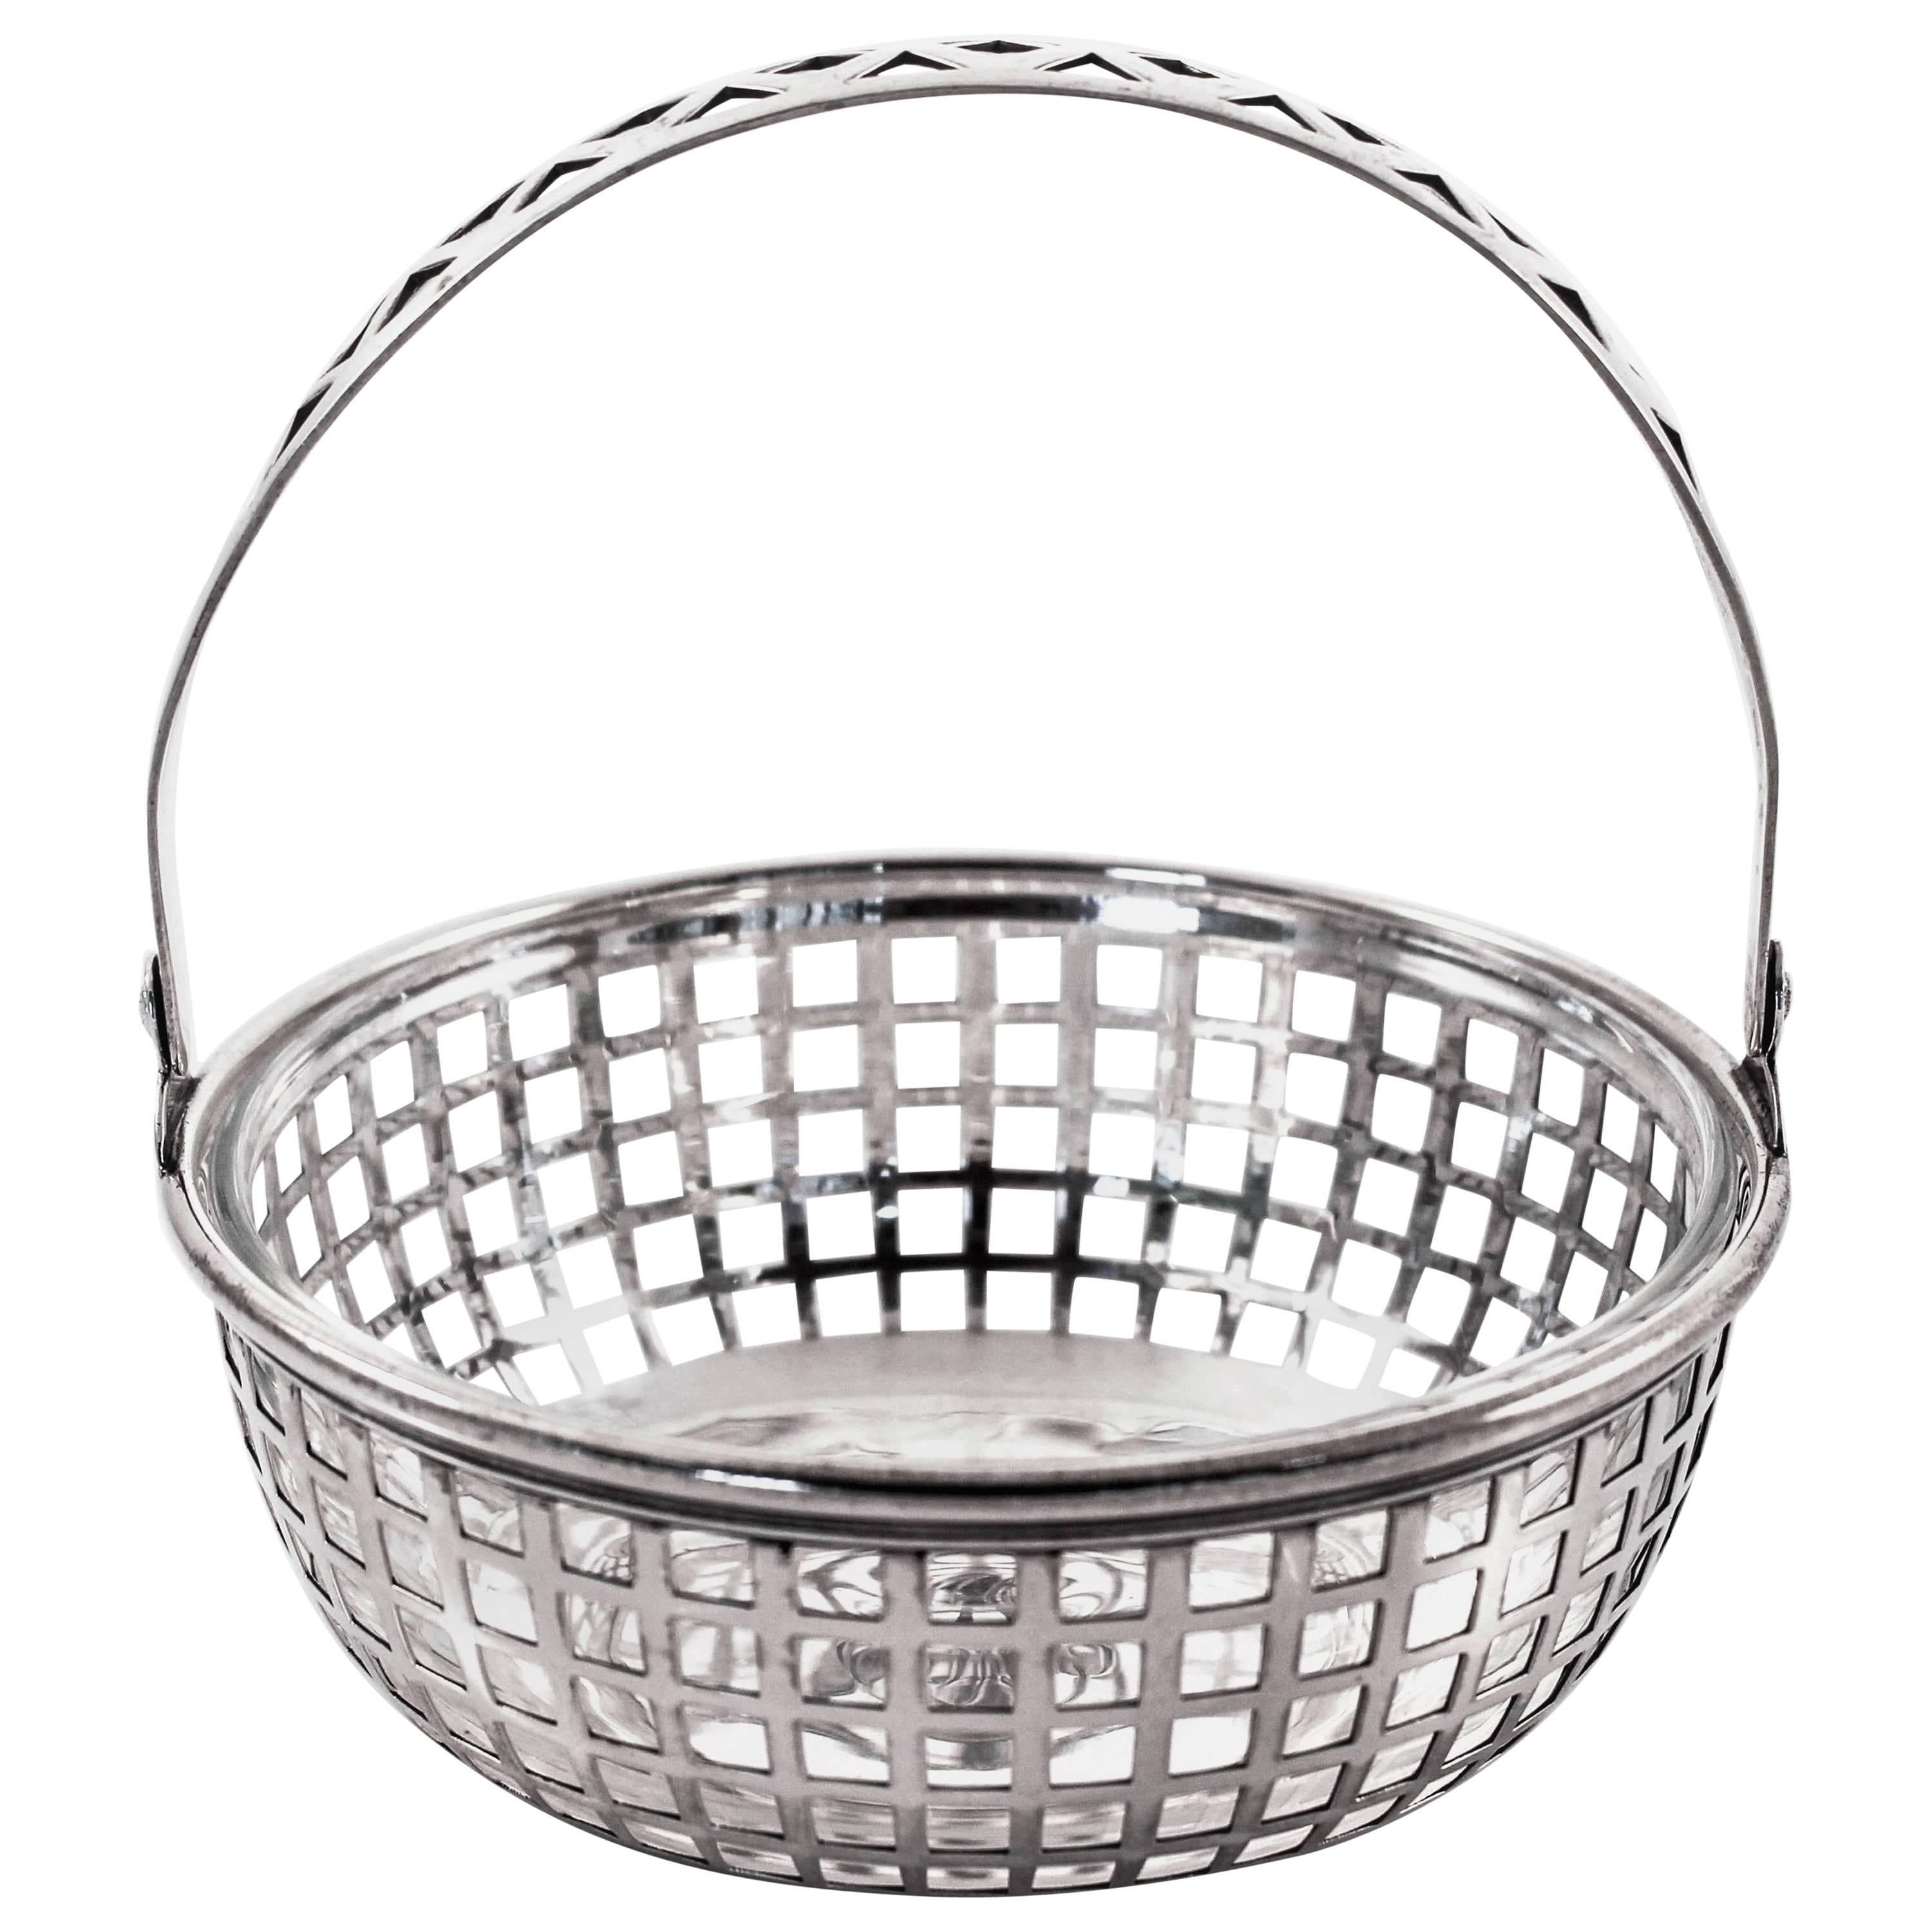 Basket with Glass Liner